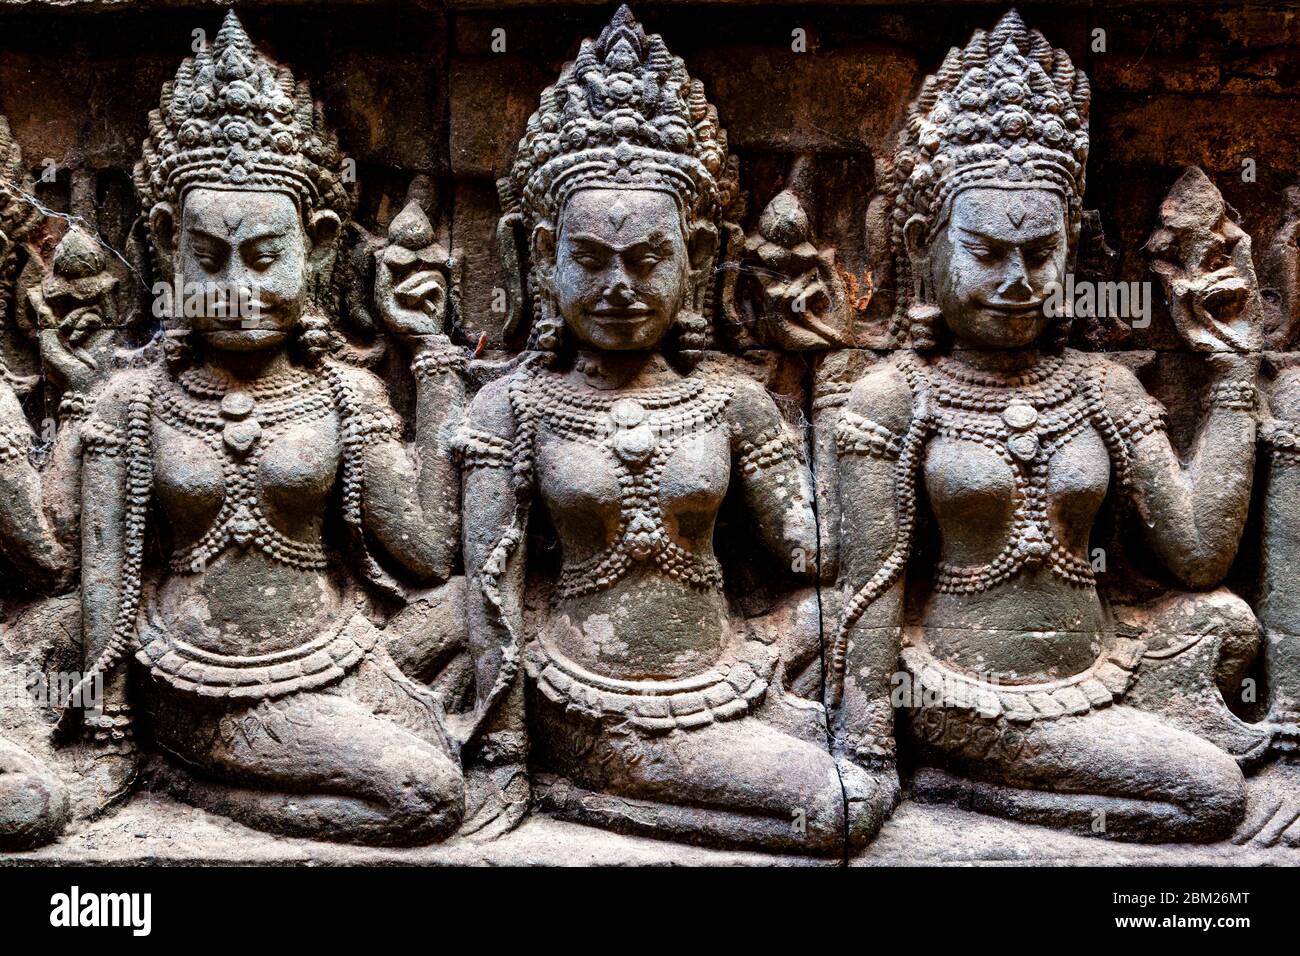 The Terrace Of The Leper King (Bas Reliefs), Angkor Thom, Siem Reap, Cambodia. Stock Photo